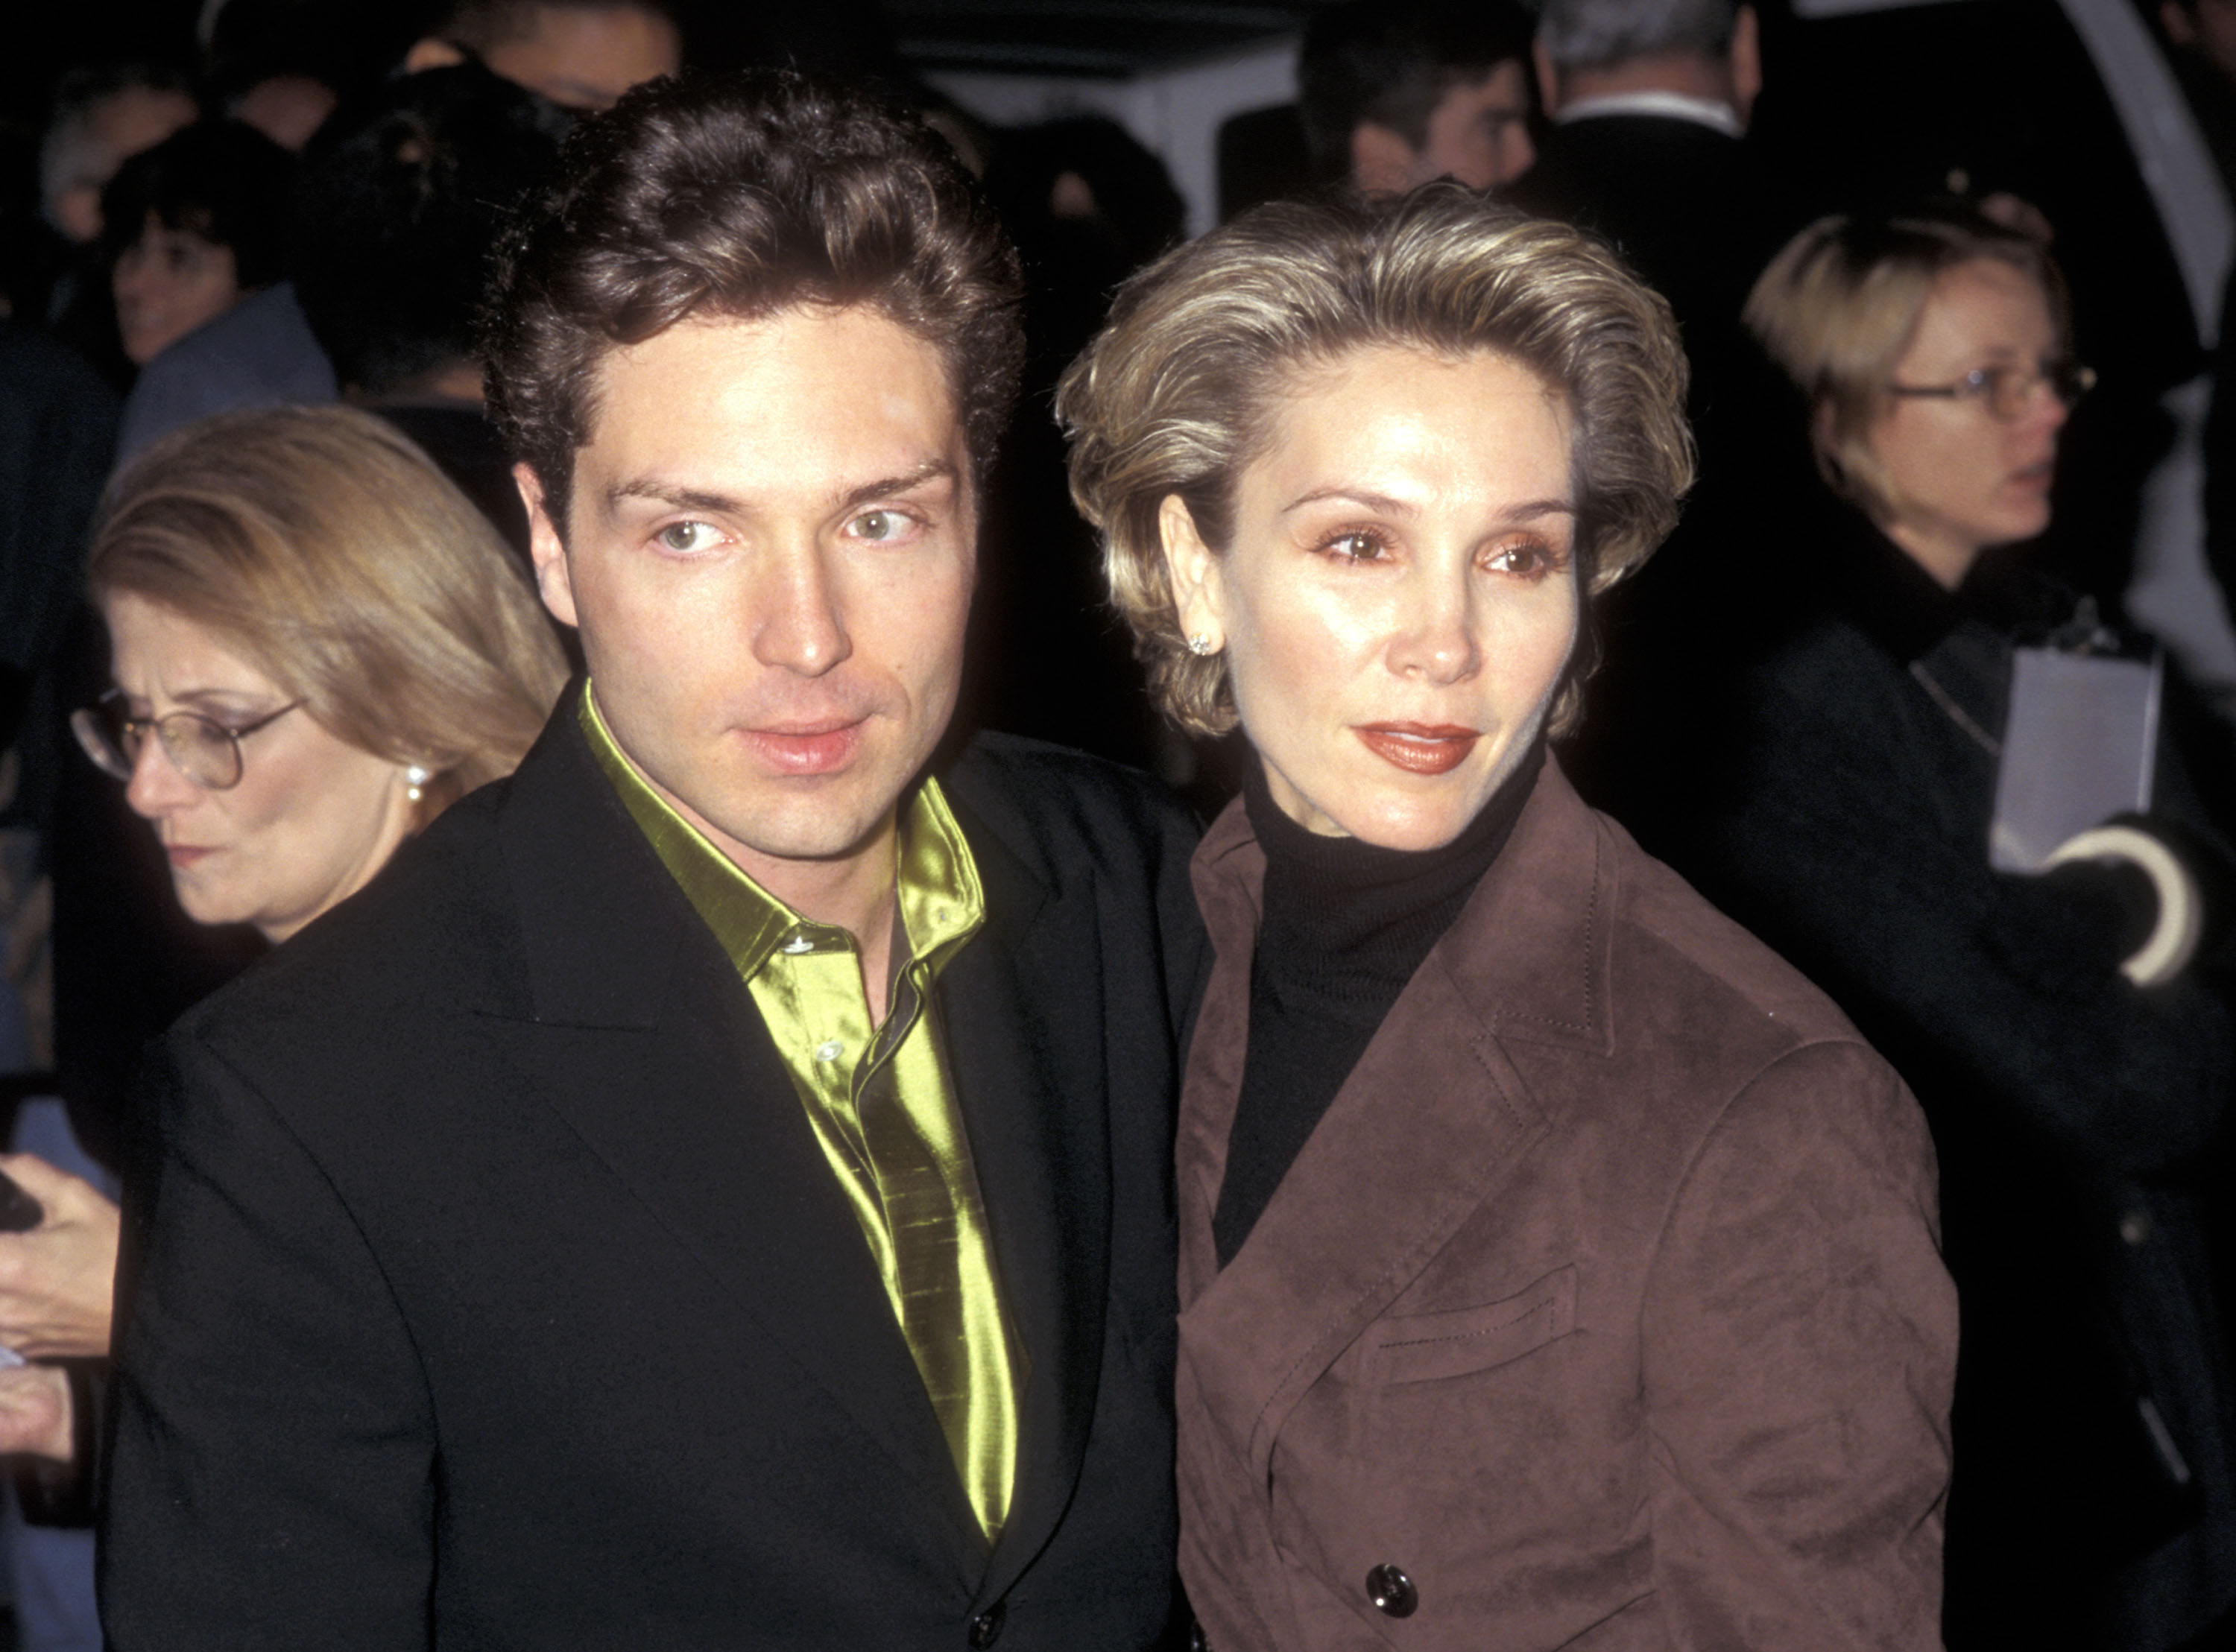 Richard Marx and Rhodes in November 1996 in New York City. | Source: Getty Images